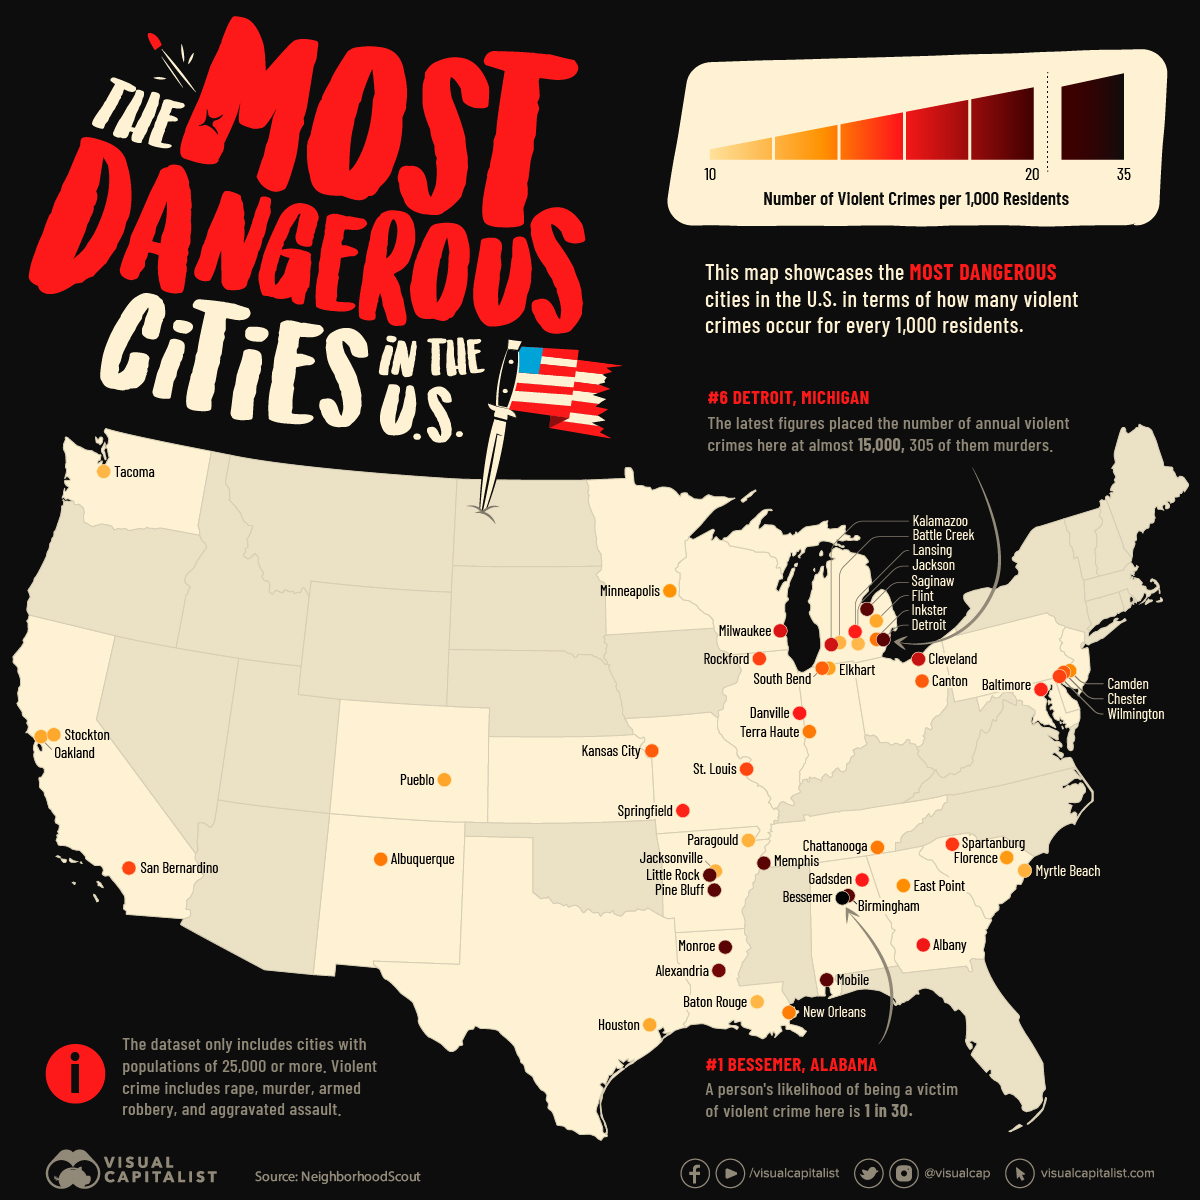 map of the most dangerous cities in the U.S.